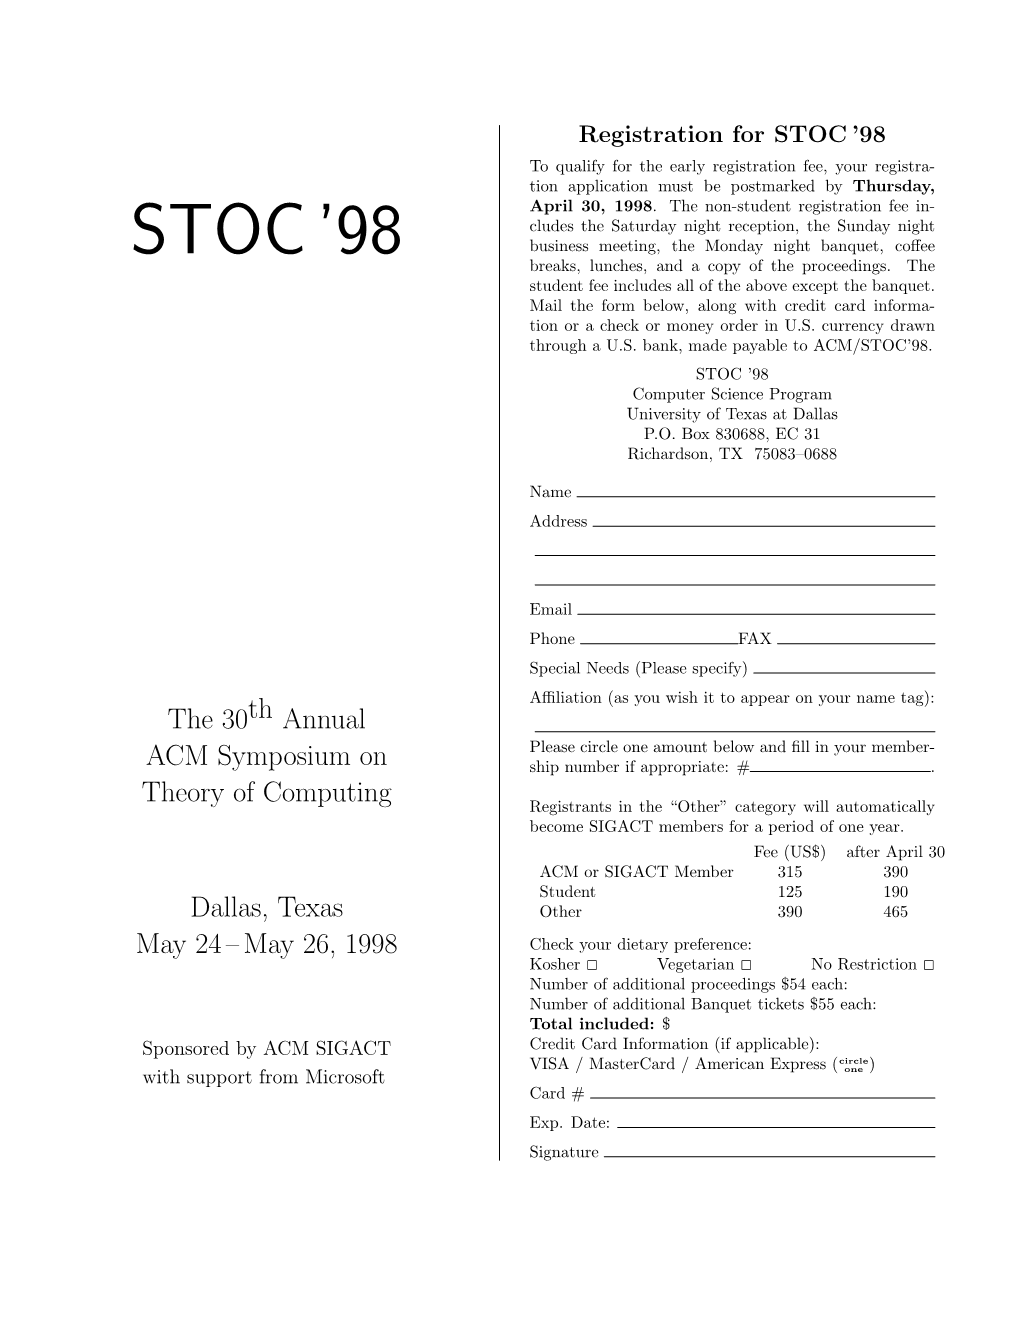 STOC ’98 to Qualify for the Early Registration Fee, Your Registra- Tion Application Must Be Postmarked by Thursday, April 30, 1998